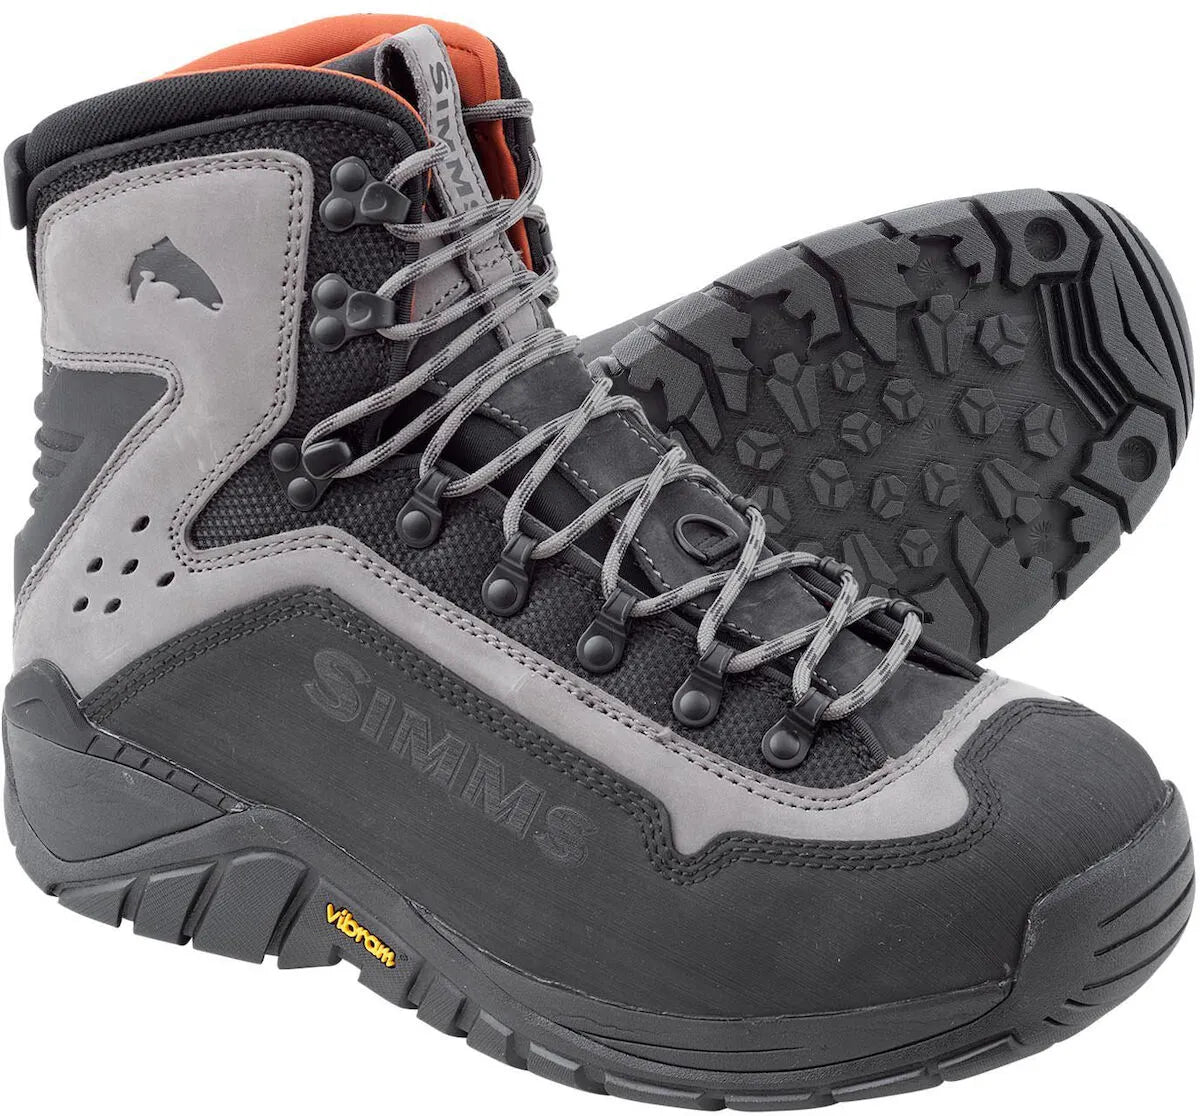 G3 Guide Boot Steel Men's Fishing Boots